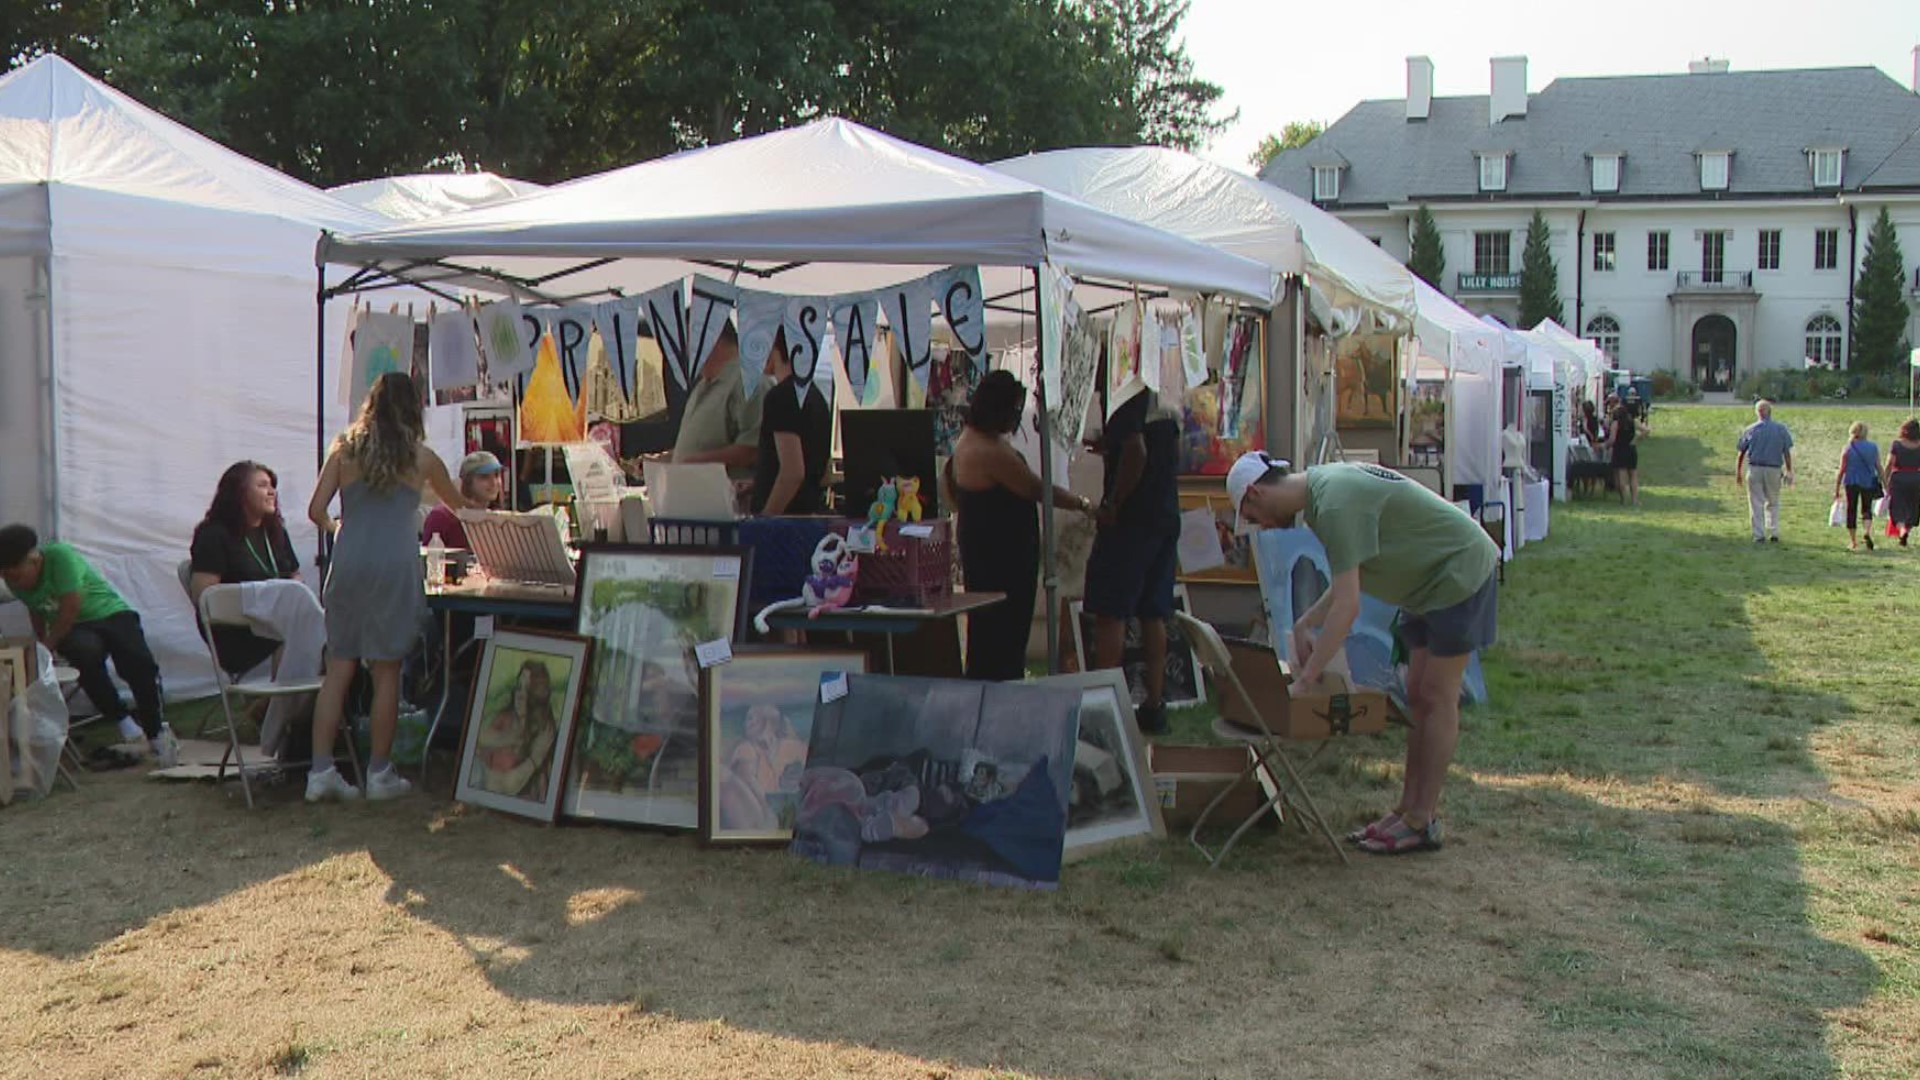 During the fair, visitors can experience the works of 300 artists, six stages of entertainment, and approximately 75 arts-related nonprofit organizations.